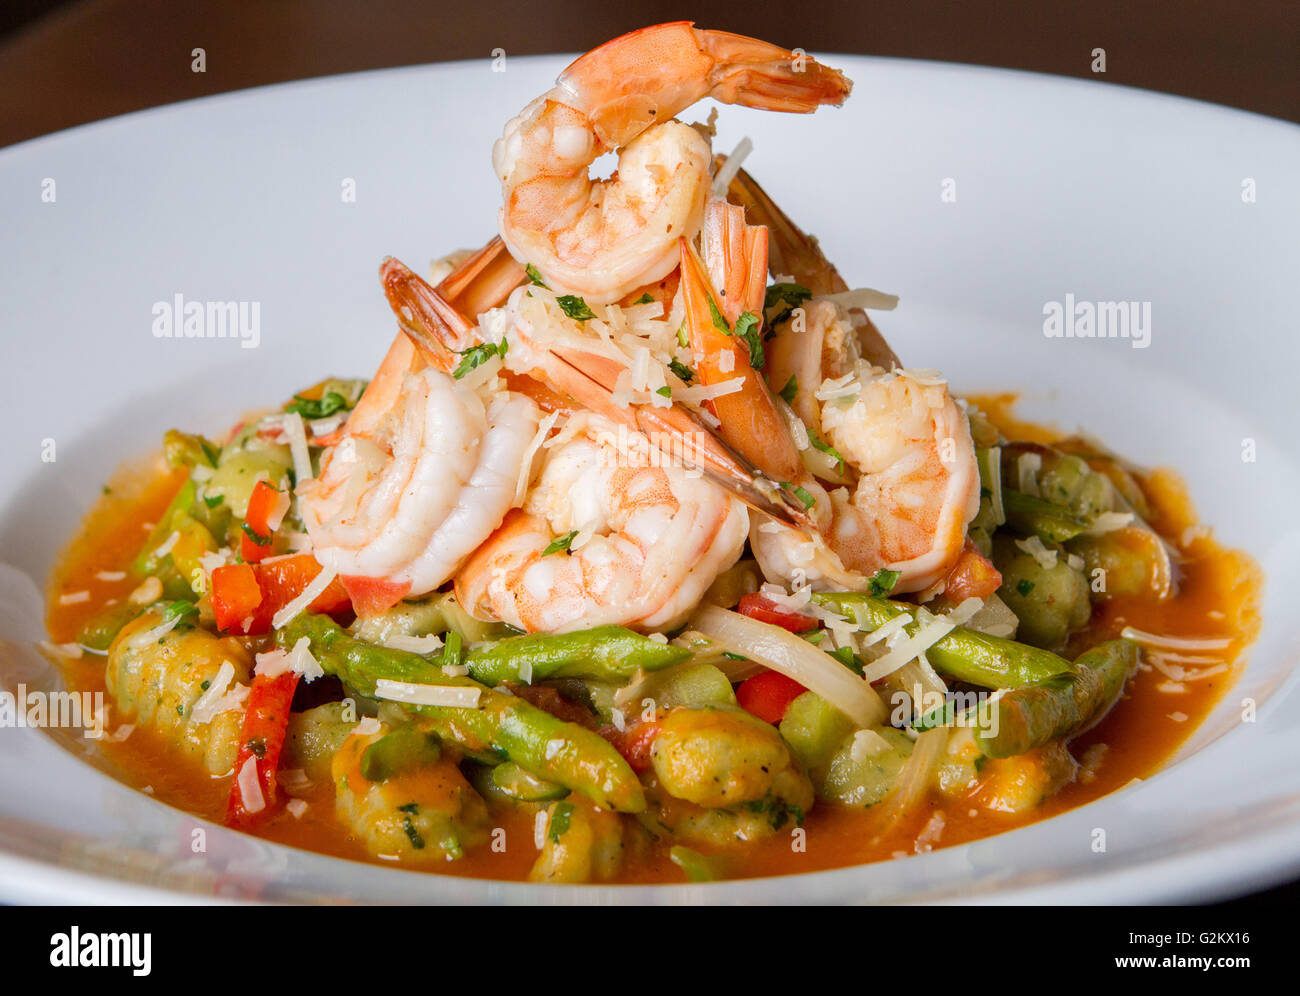 Pile of Shrimp on Bed of Assorted Vegetables in Red Sauce Stock Photo